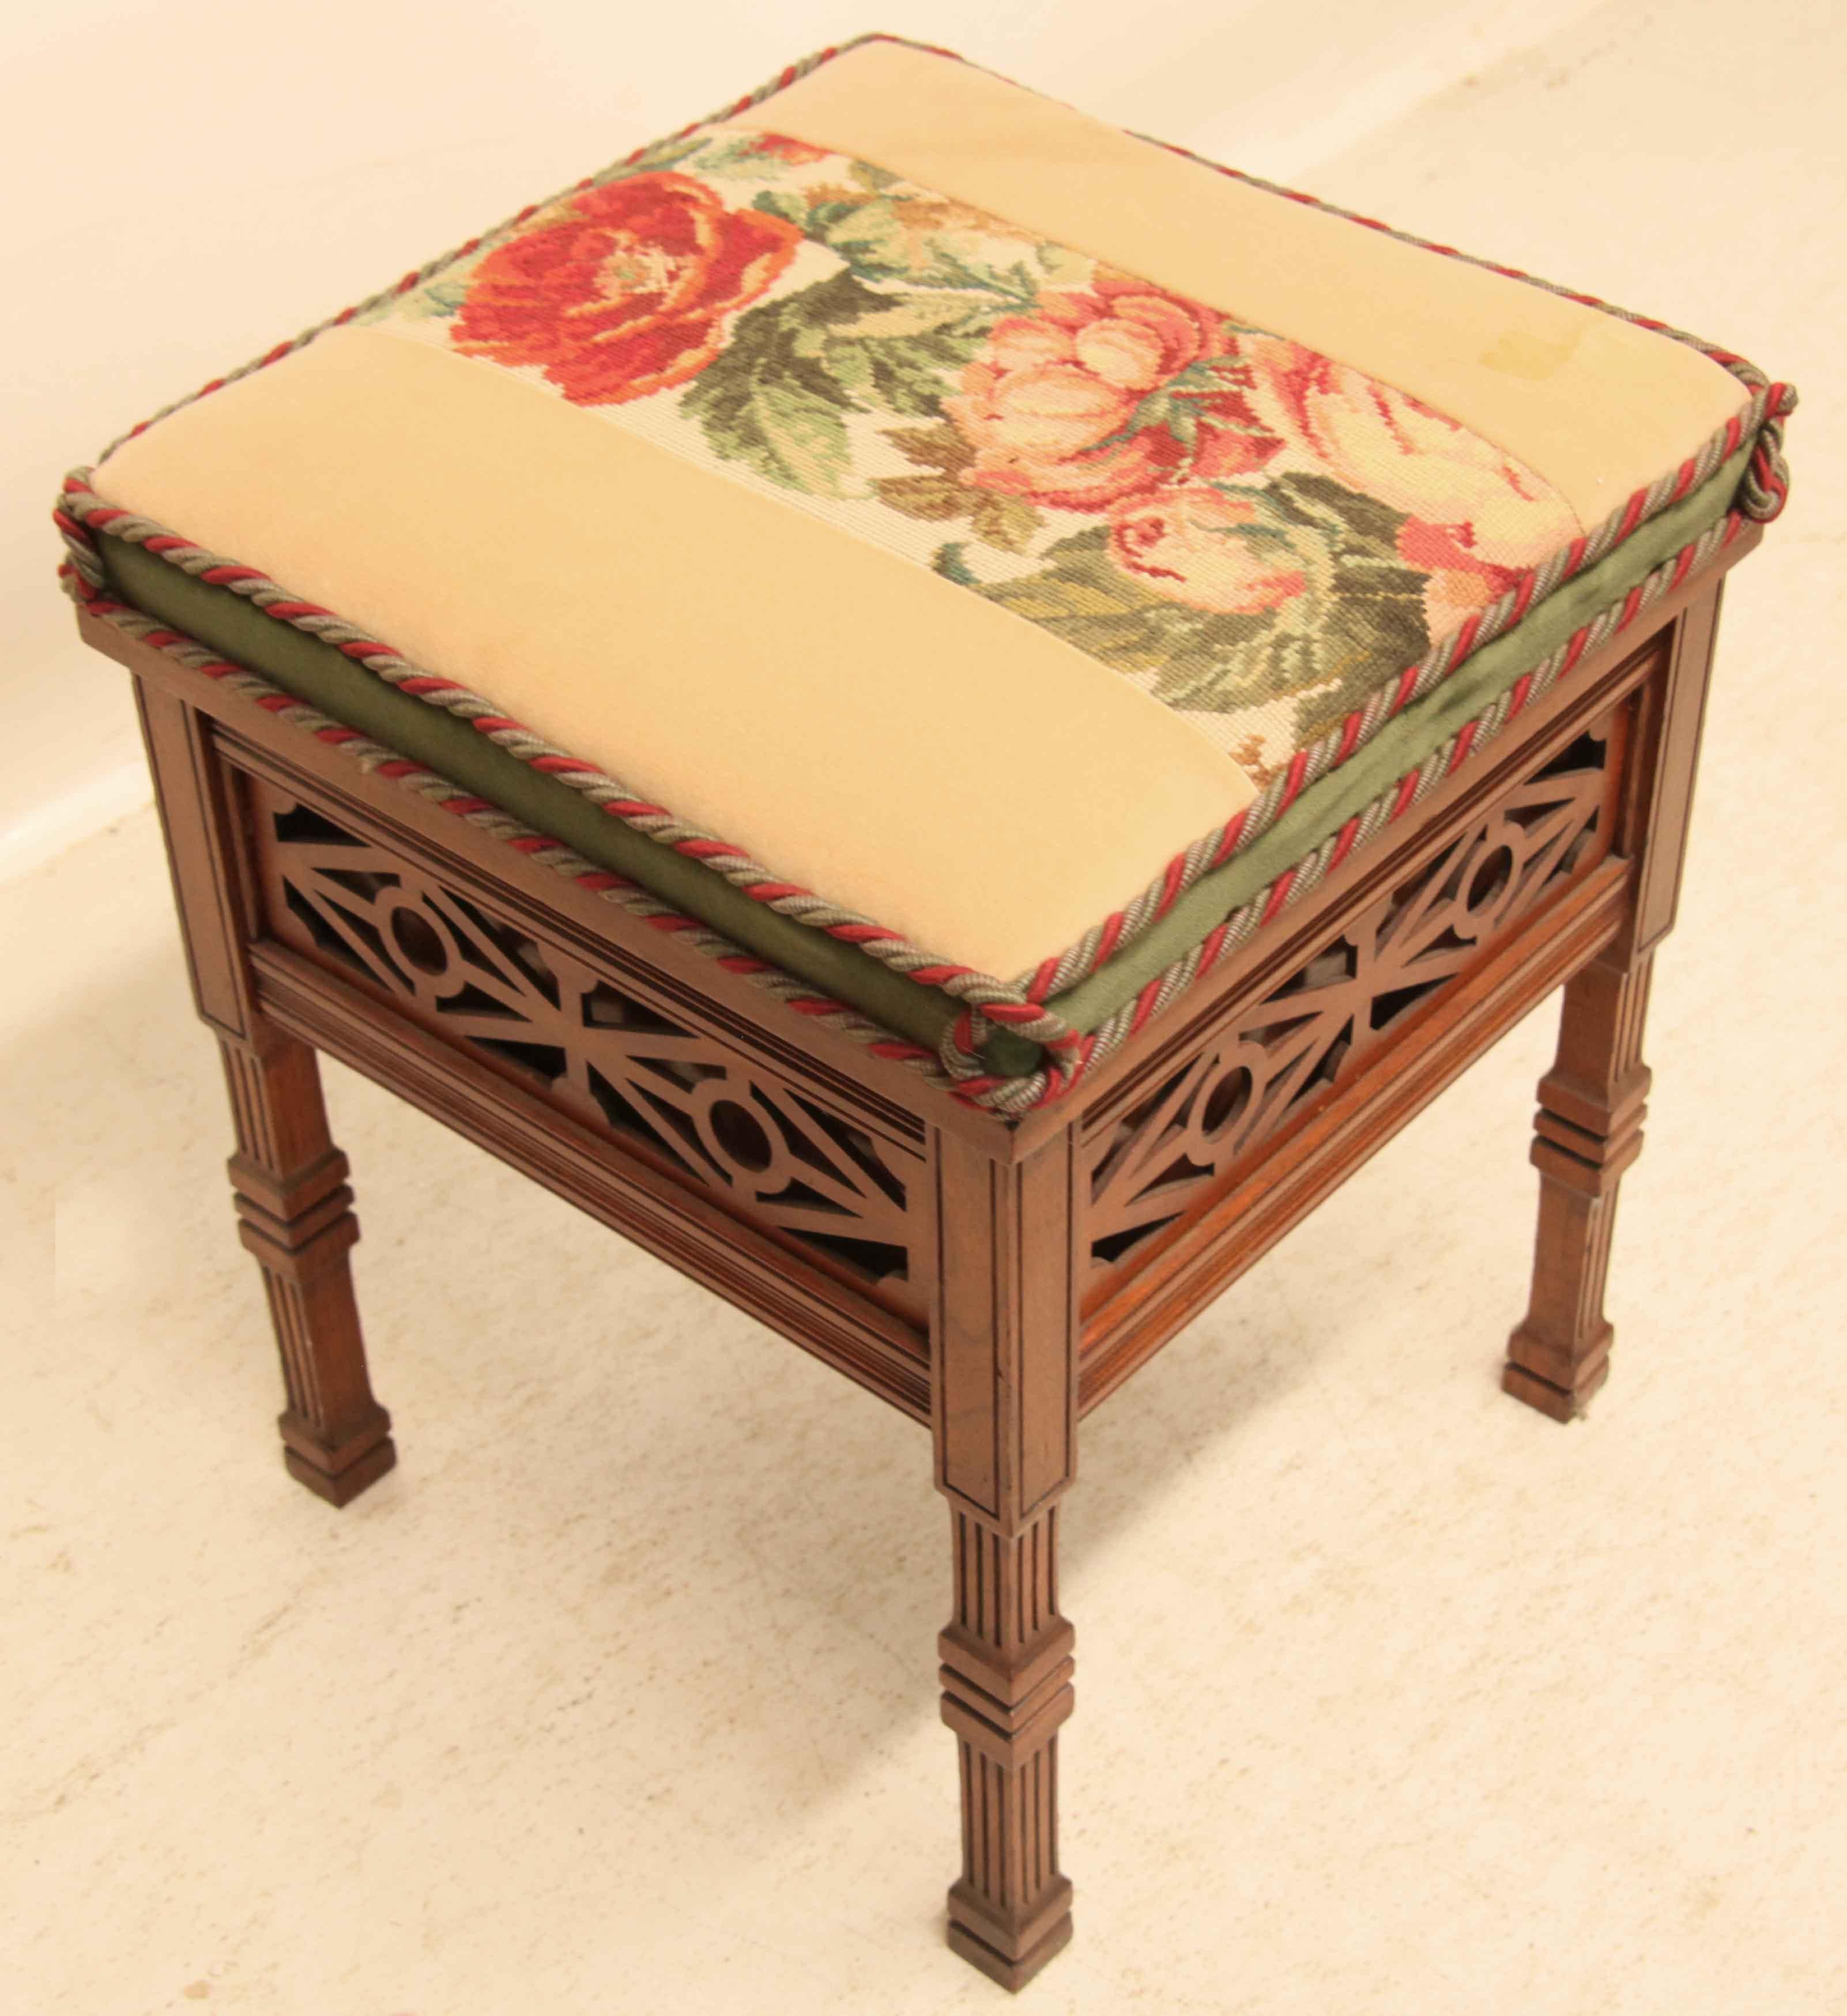 Edwardian lift top stool,  the top with vertical needlepoint floral design flanked by light beige fabric, top lifts up, ideal for piano music storage.  The edge of the top has red and gray twisted cording with green velvet in between.  All four